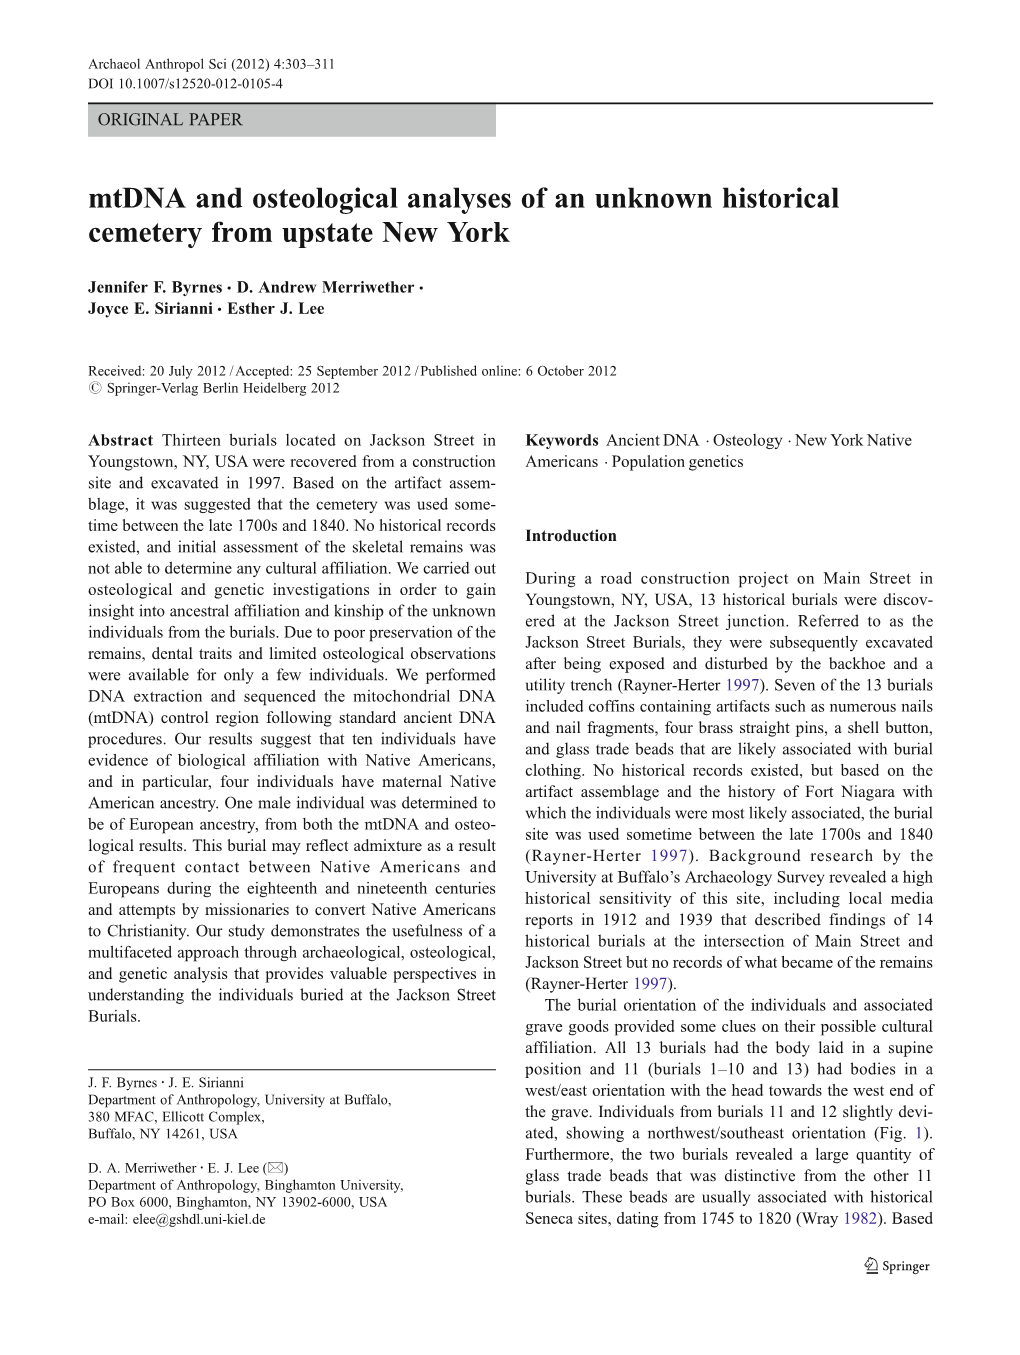 Mtdna and Osteological Analyses of an Unknown Historical Cemetery from Upstate New York